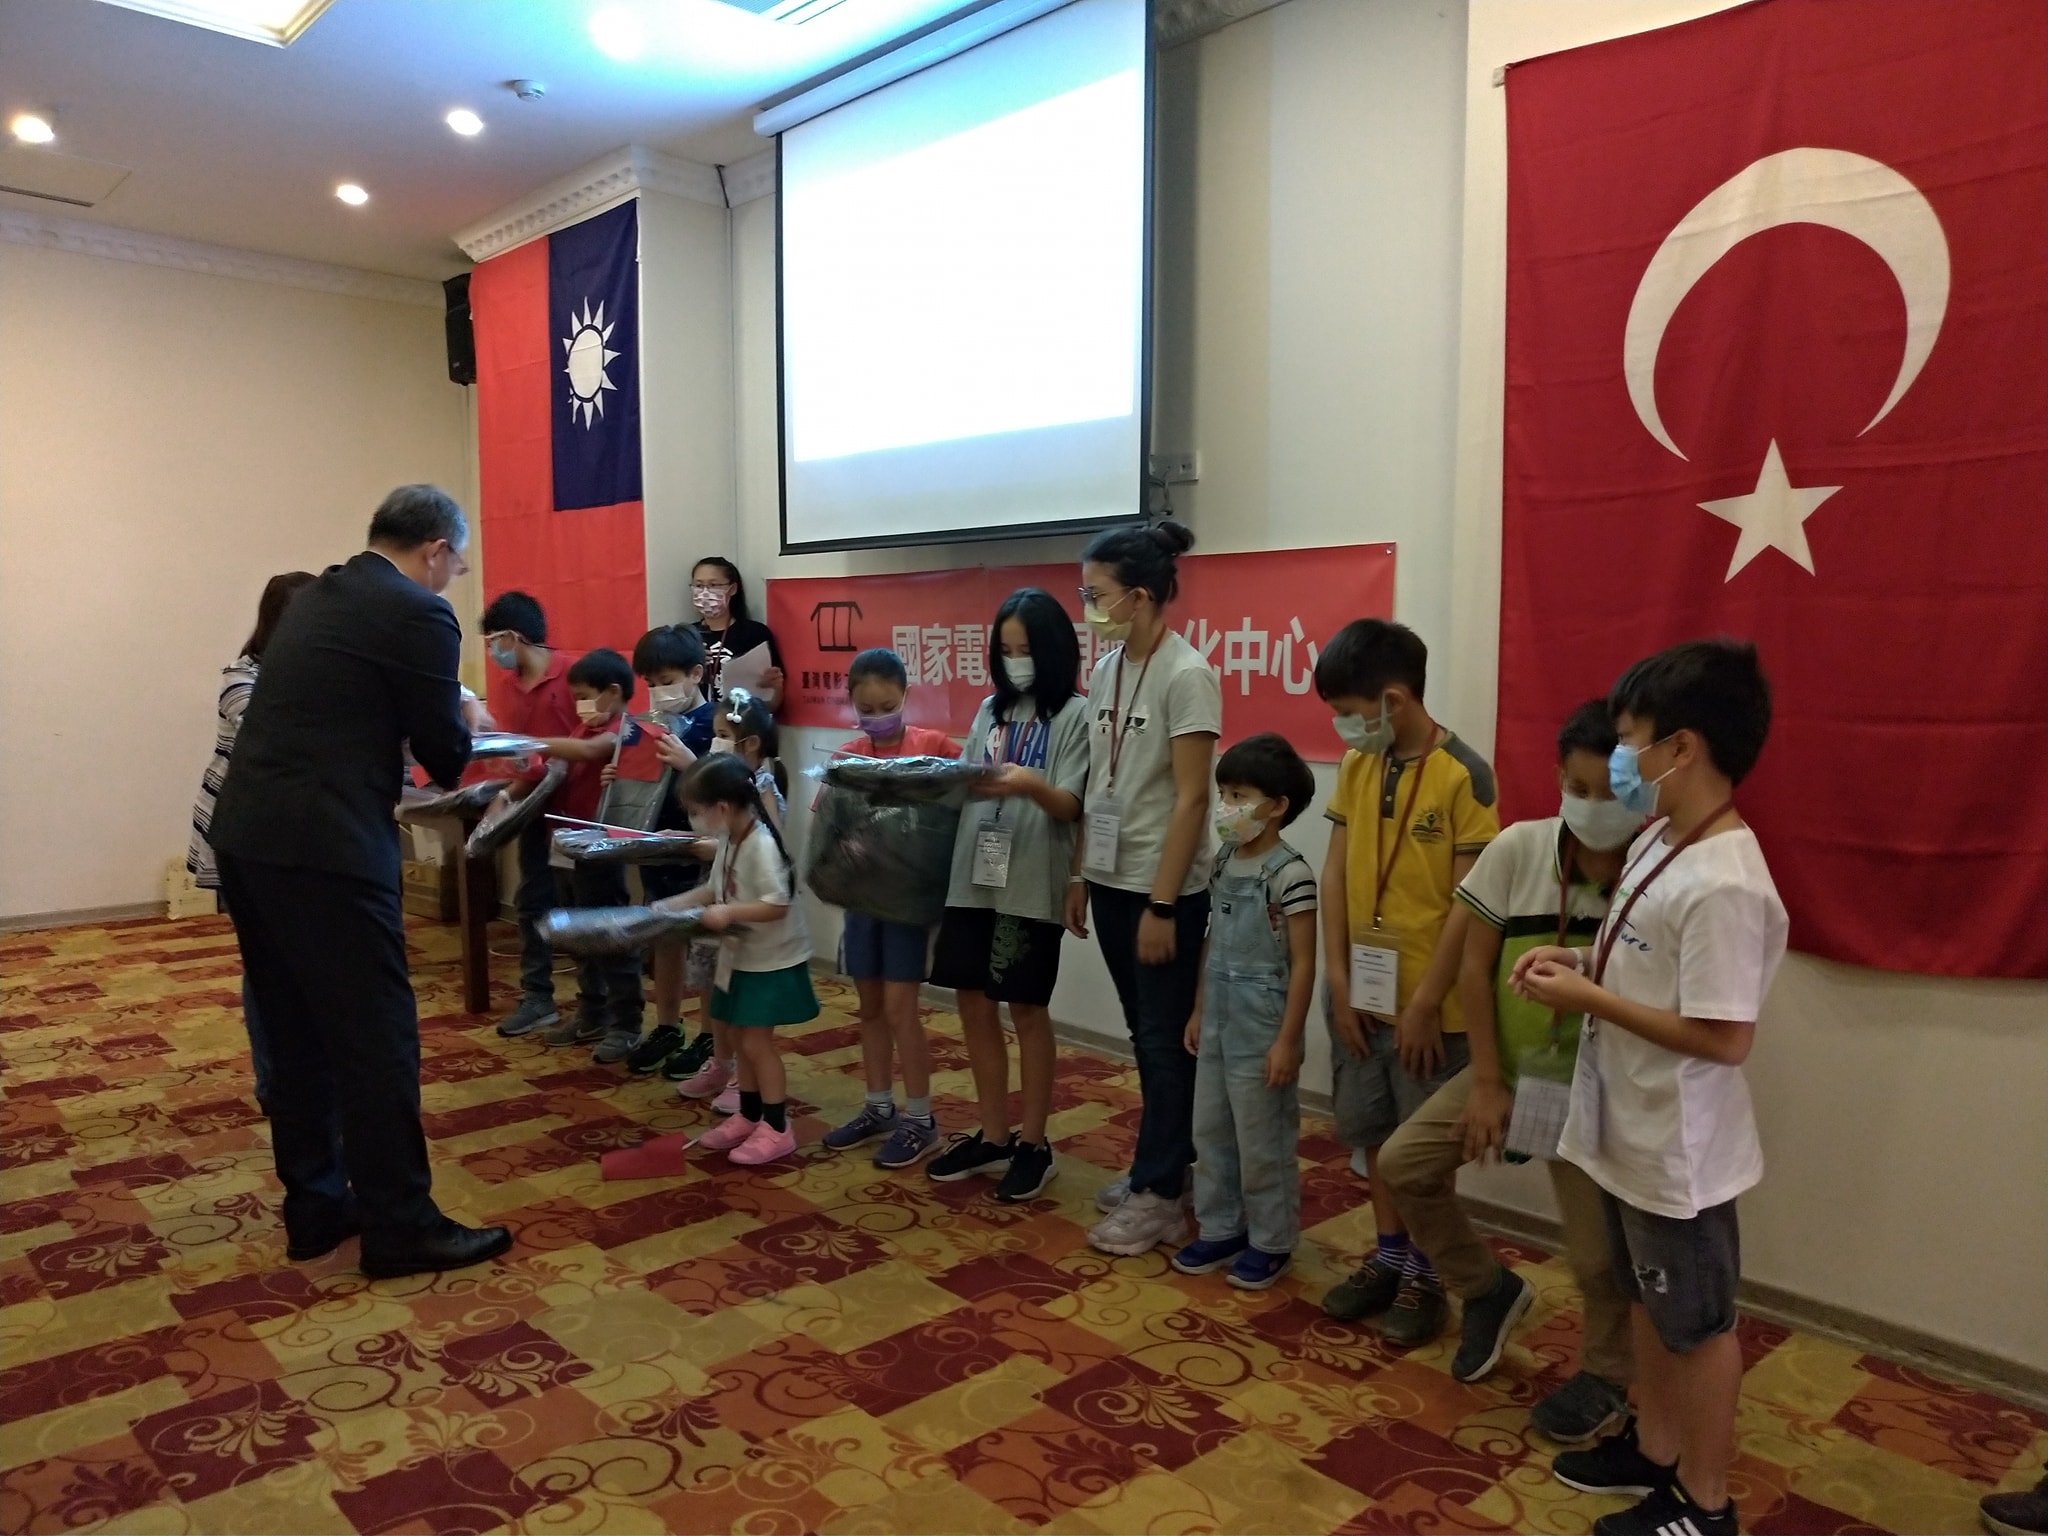 Taipei Economic and Culture Mission in Ankara held the "Taiwan Traditional Chinese Characters Cultural Camp". (Photo/Retrieved from the Facebook of Taiwan in Turkey, Taipei Economic and Culture Mission in Ankara)